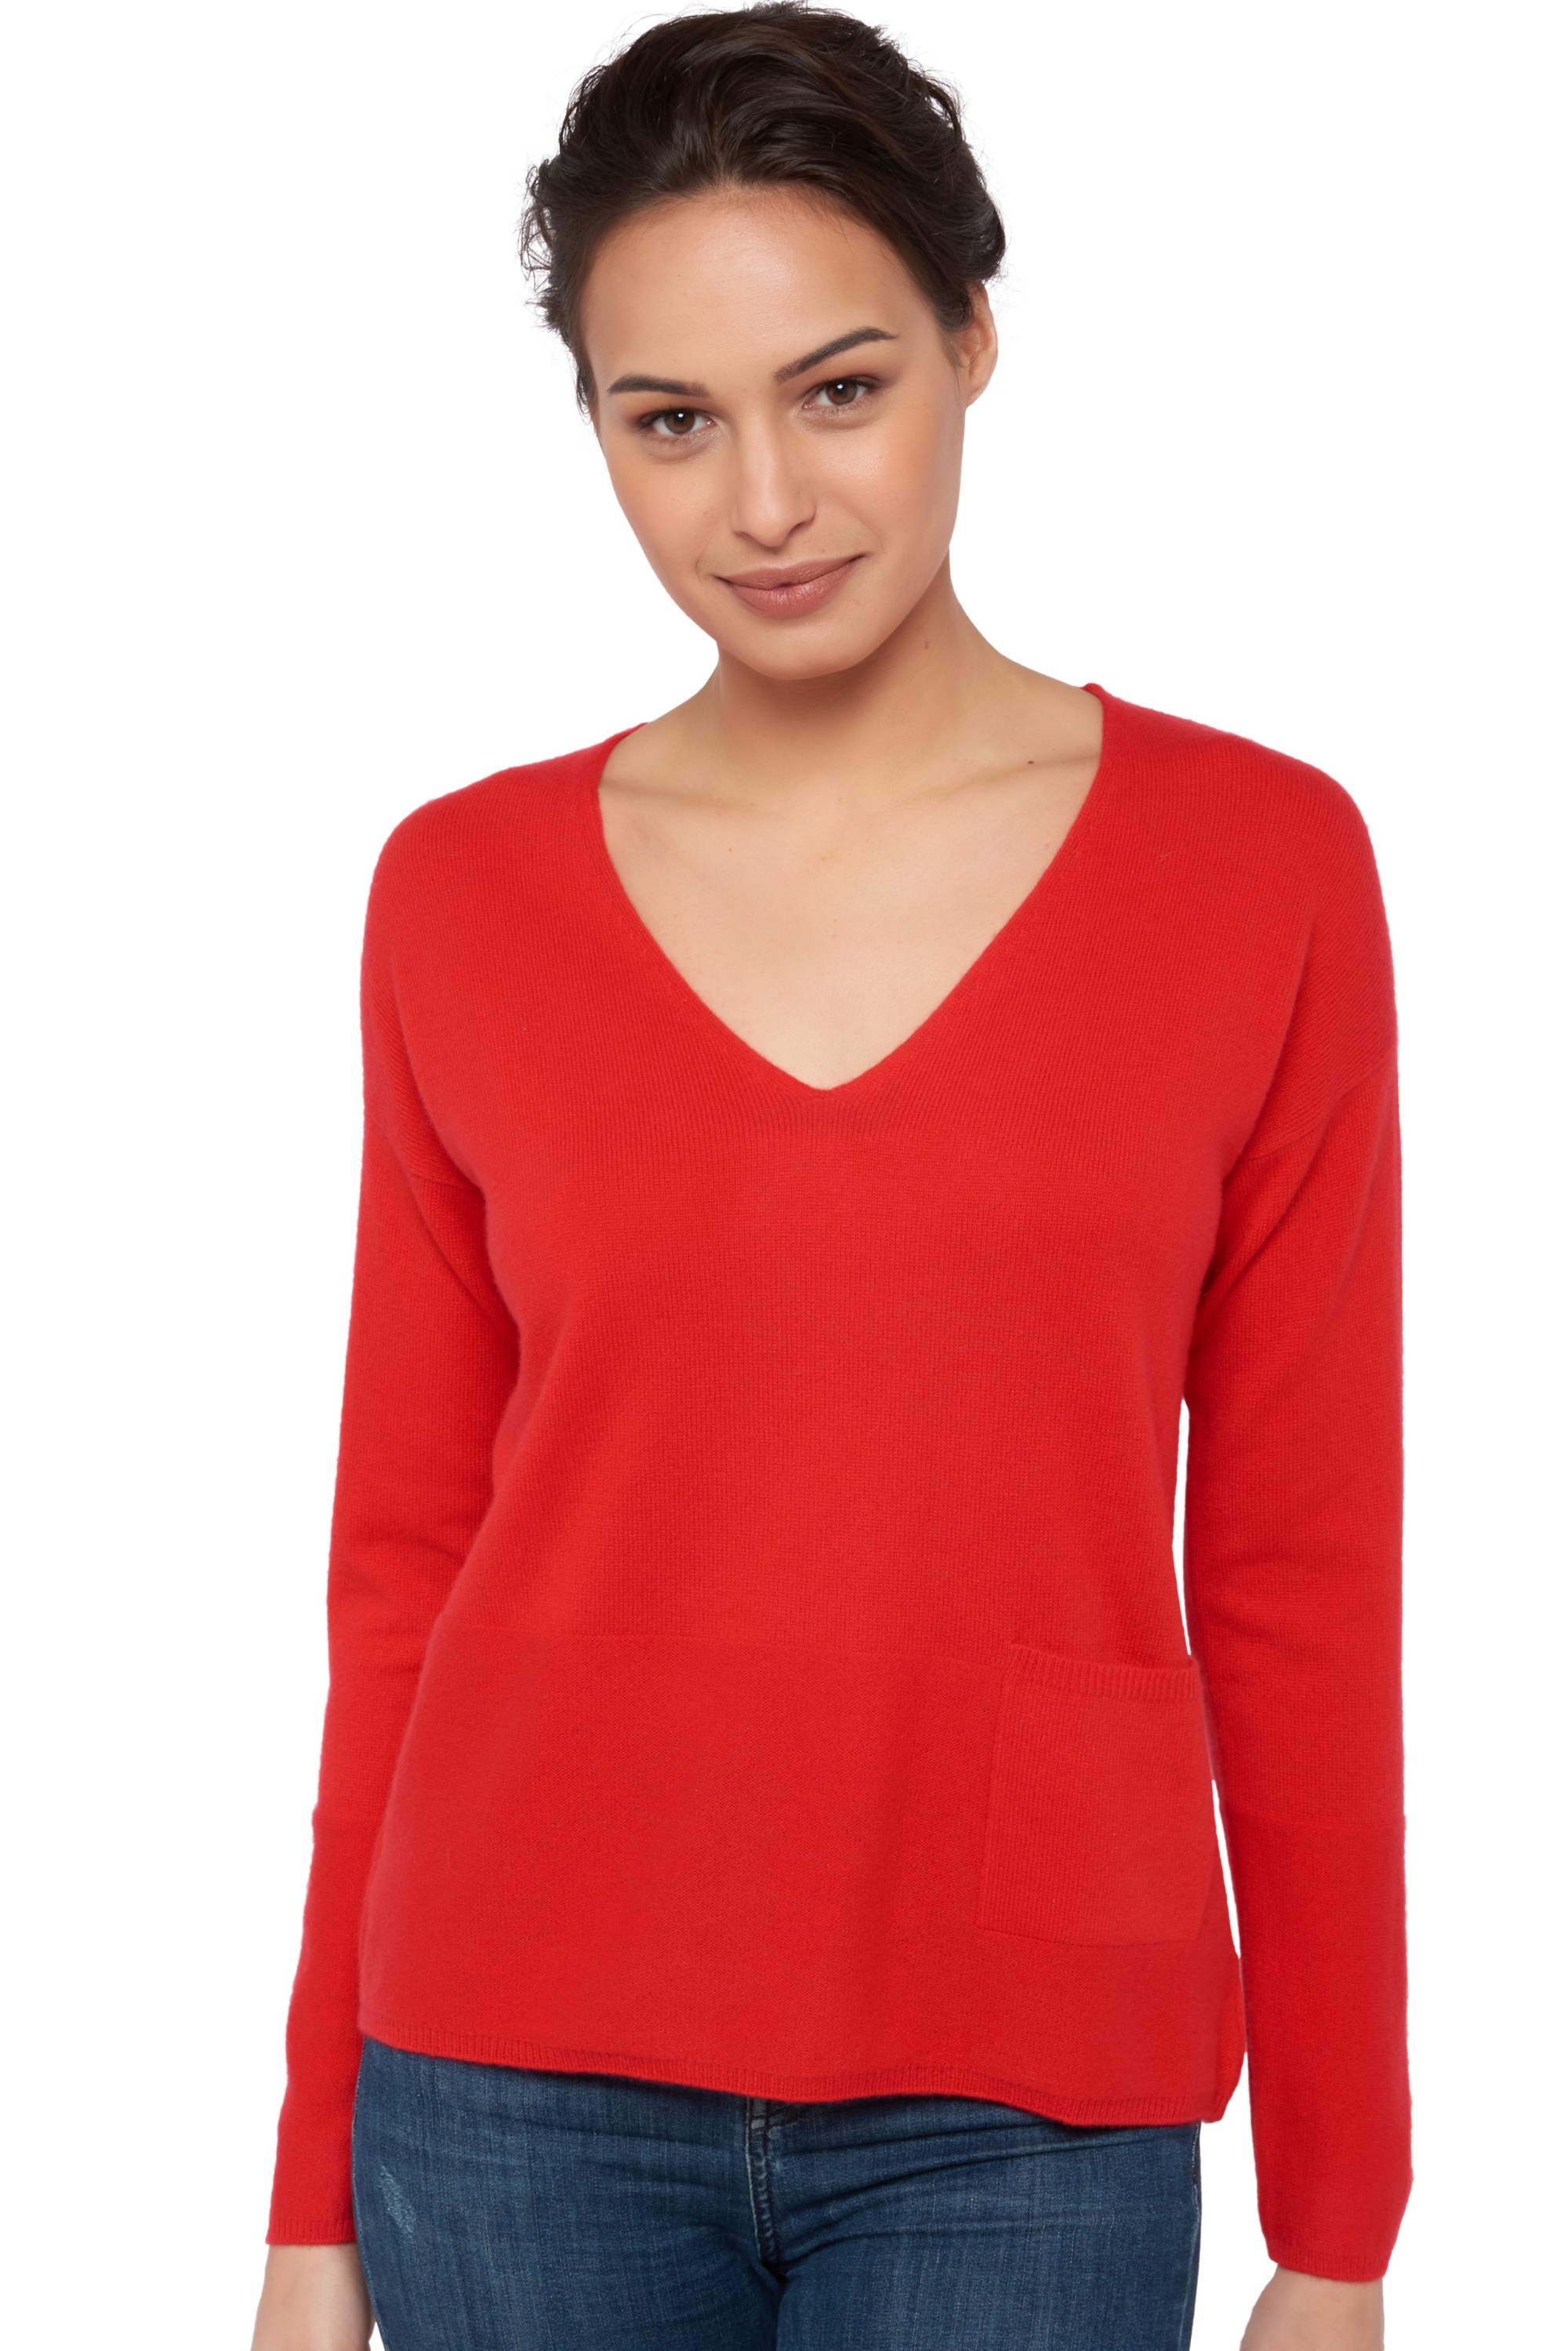 Cachemire pull femme soldes uliana rouge s